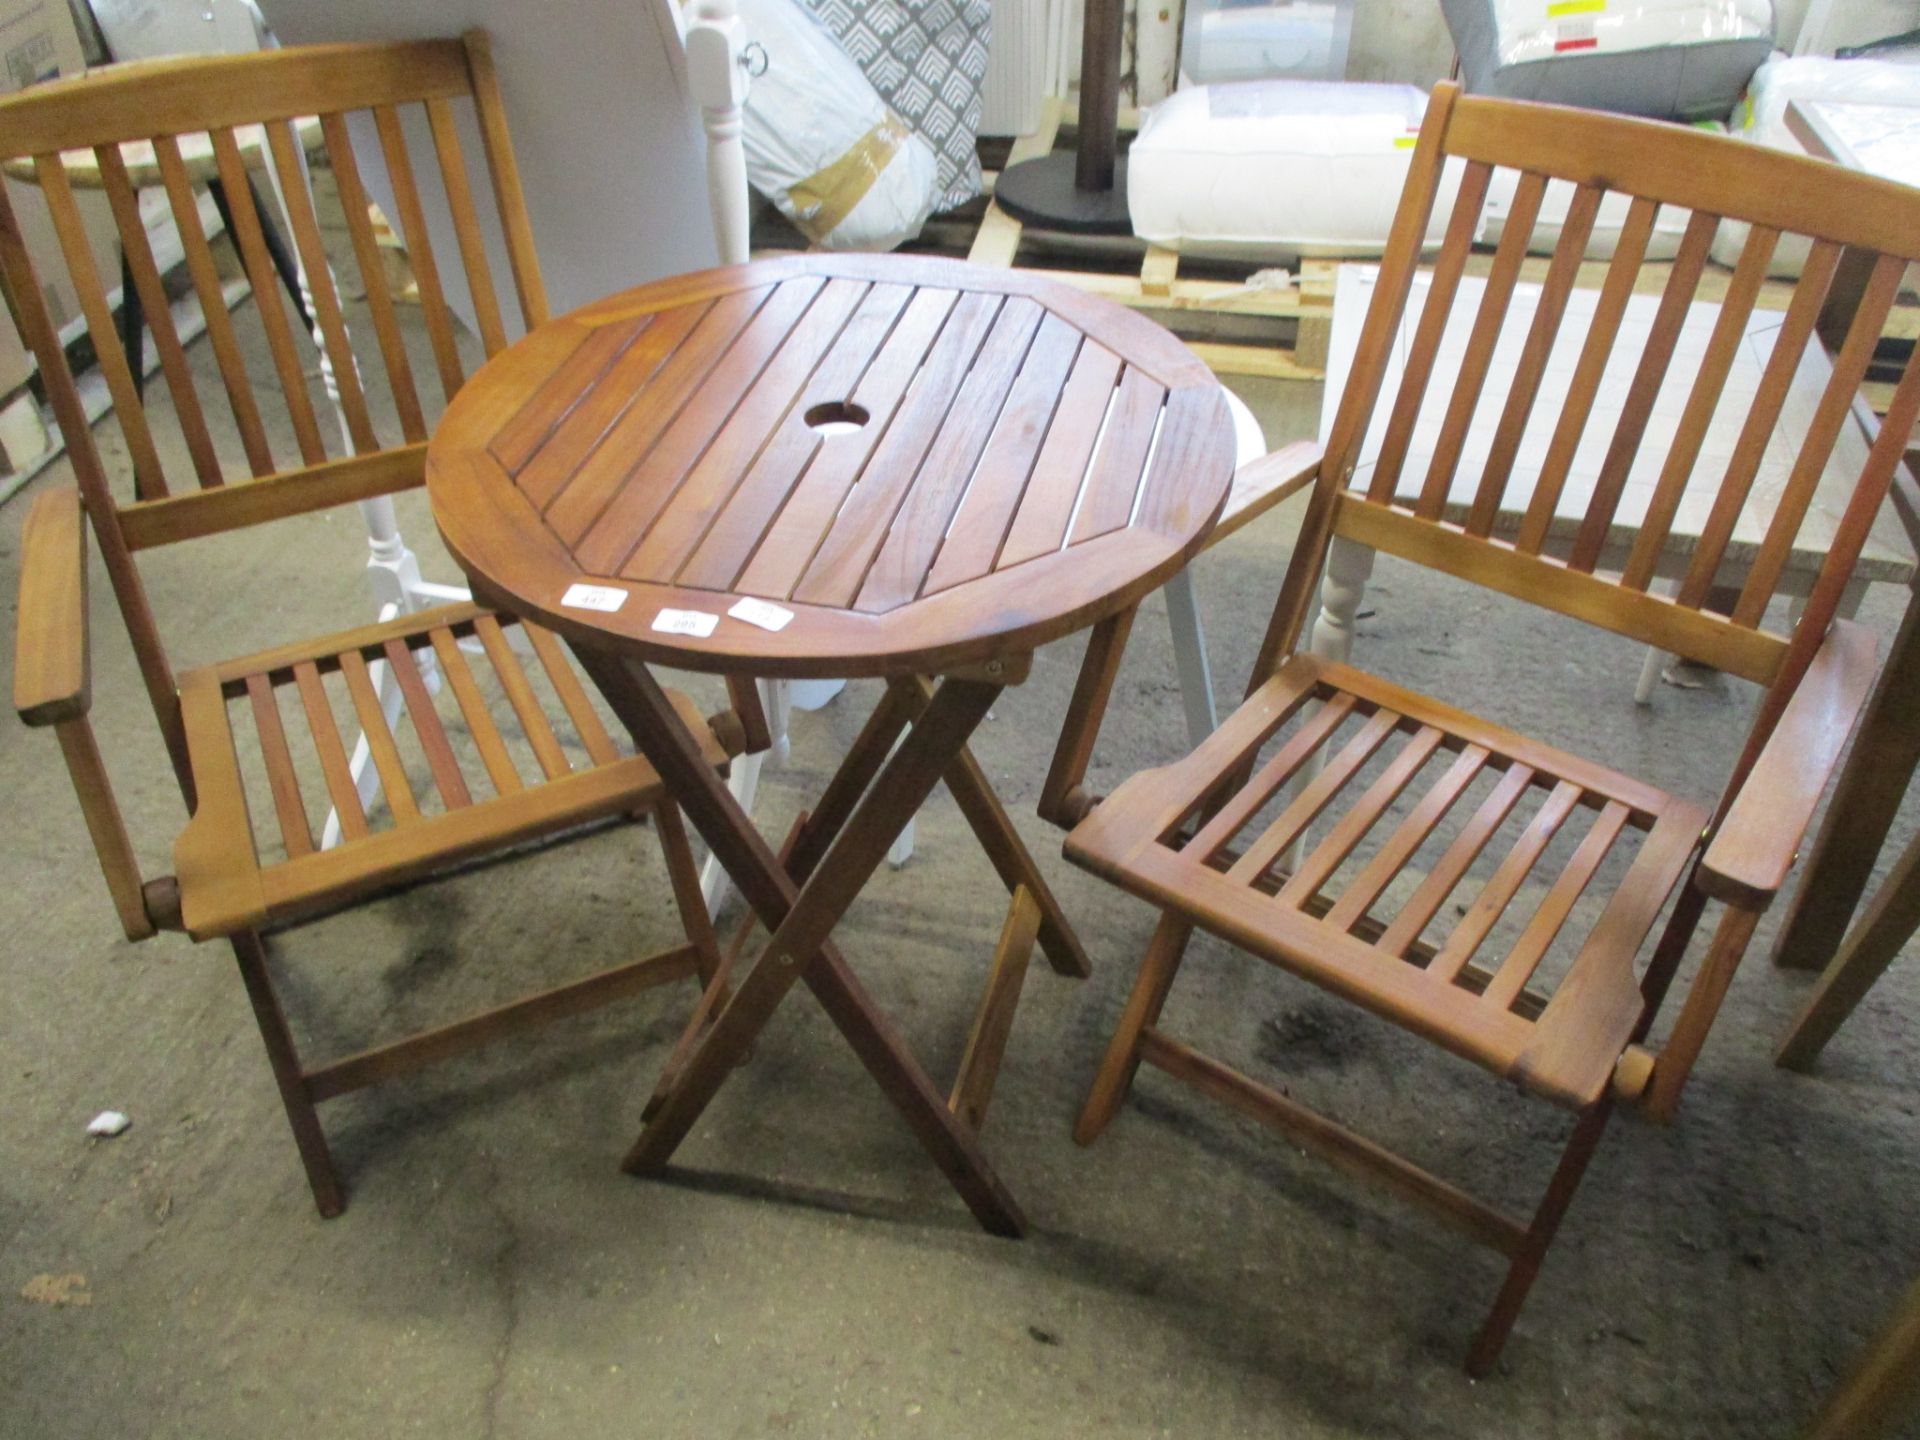 Wooden outdoor table and 2 chairs